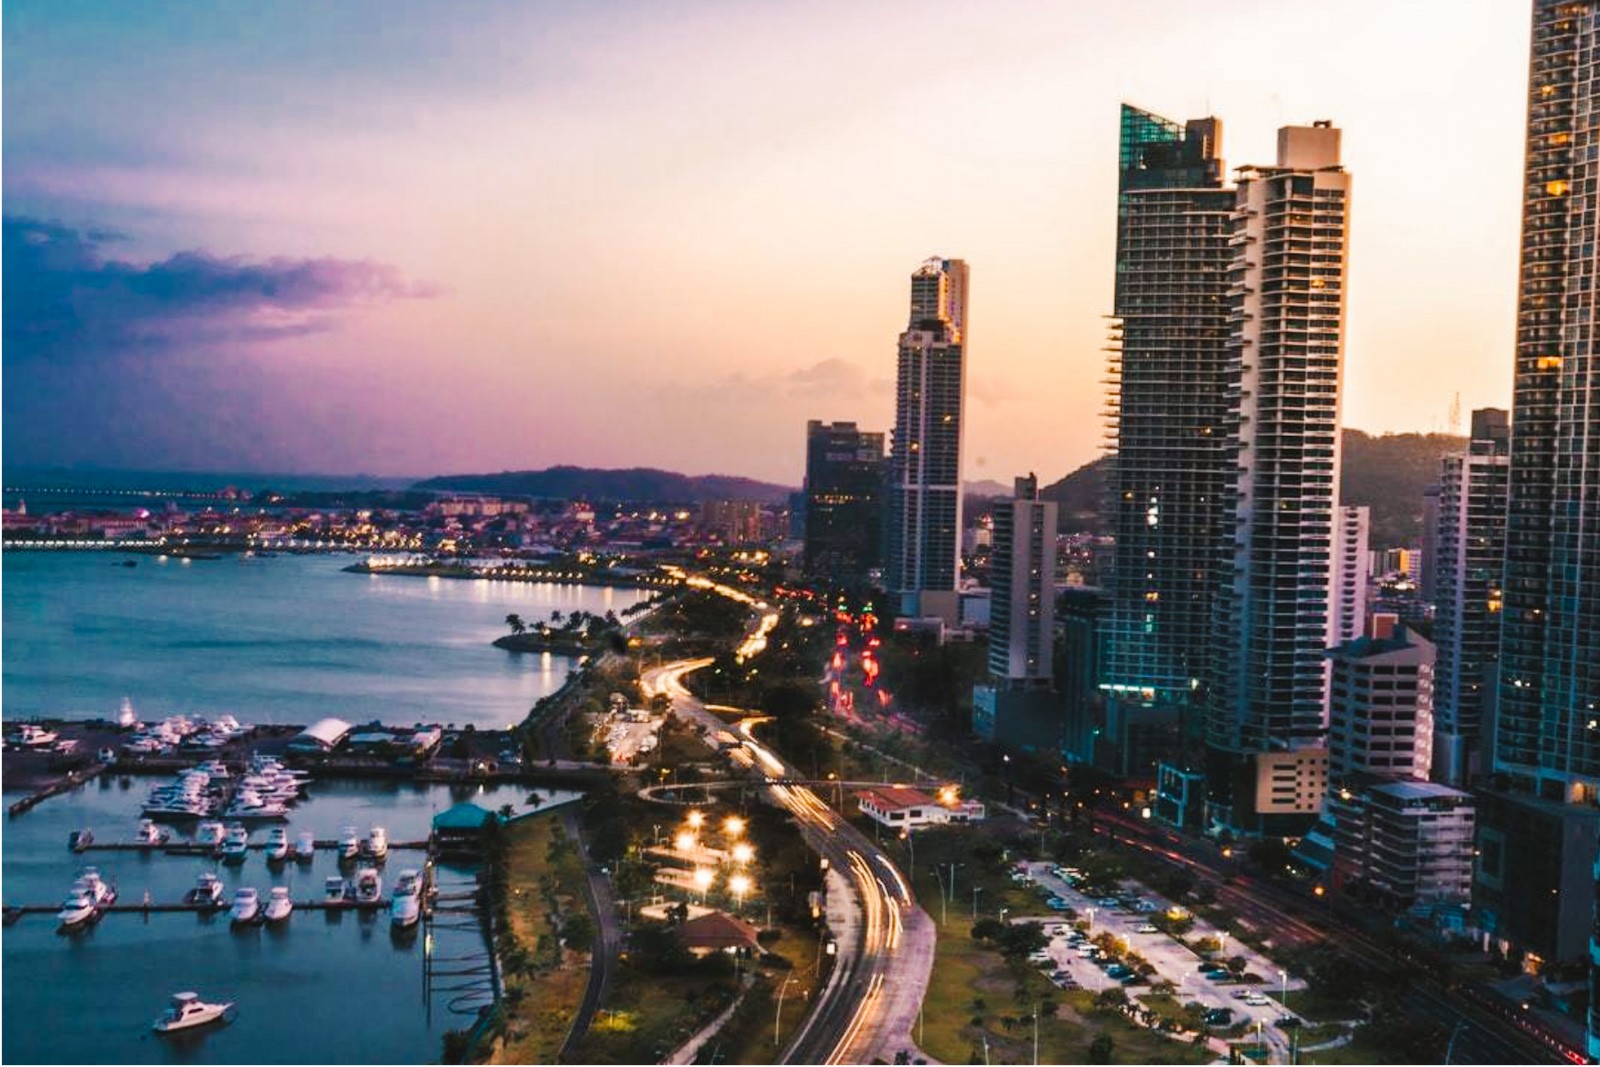 Panama City from above with a sunset purple sky and ocean to the left, skyscrapers to the right, road running between ocean/beach and skyscrapers